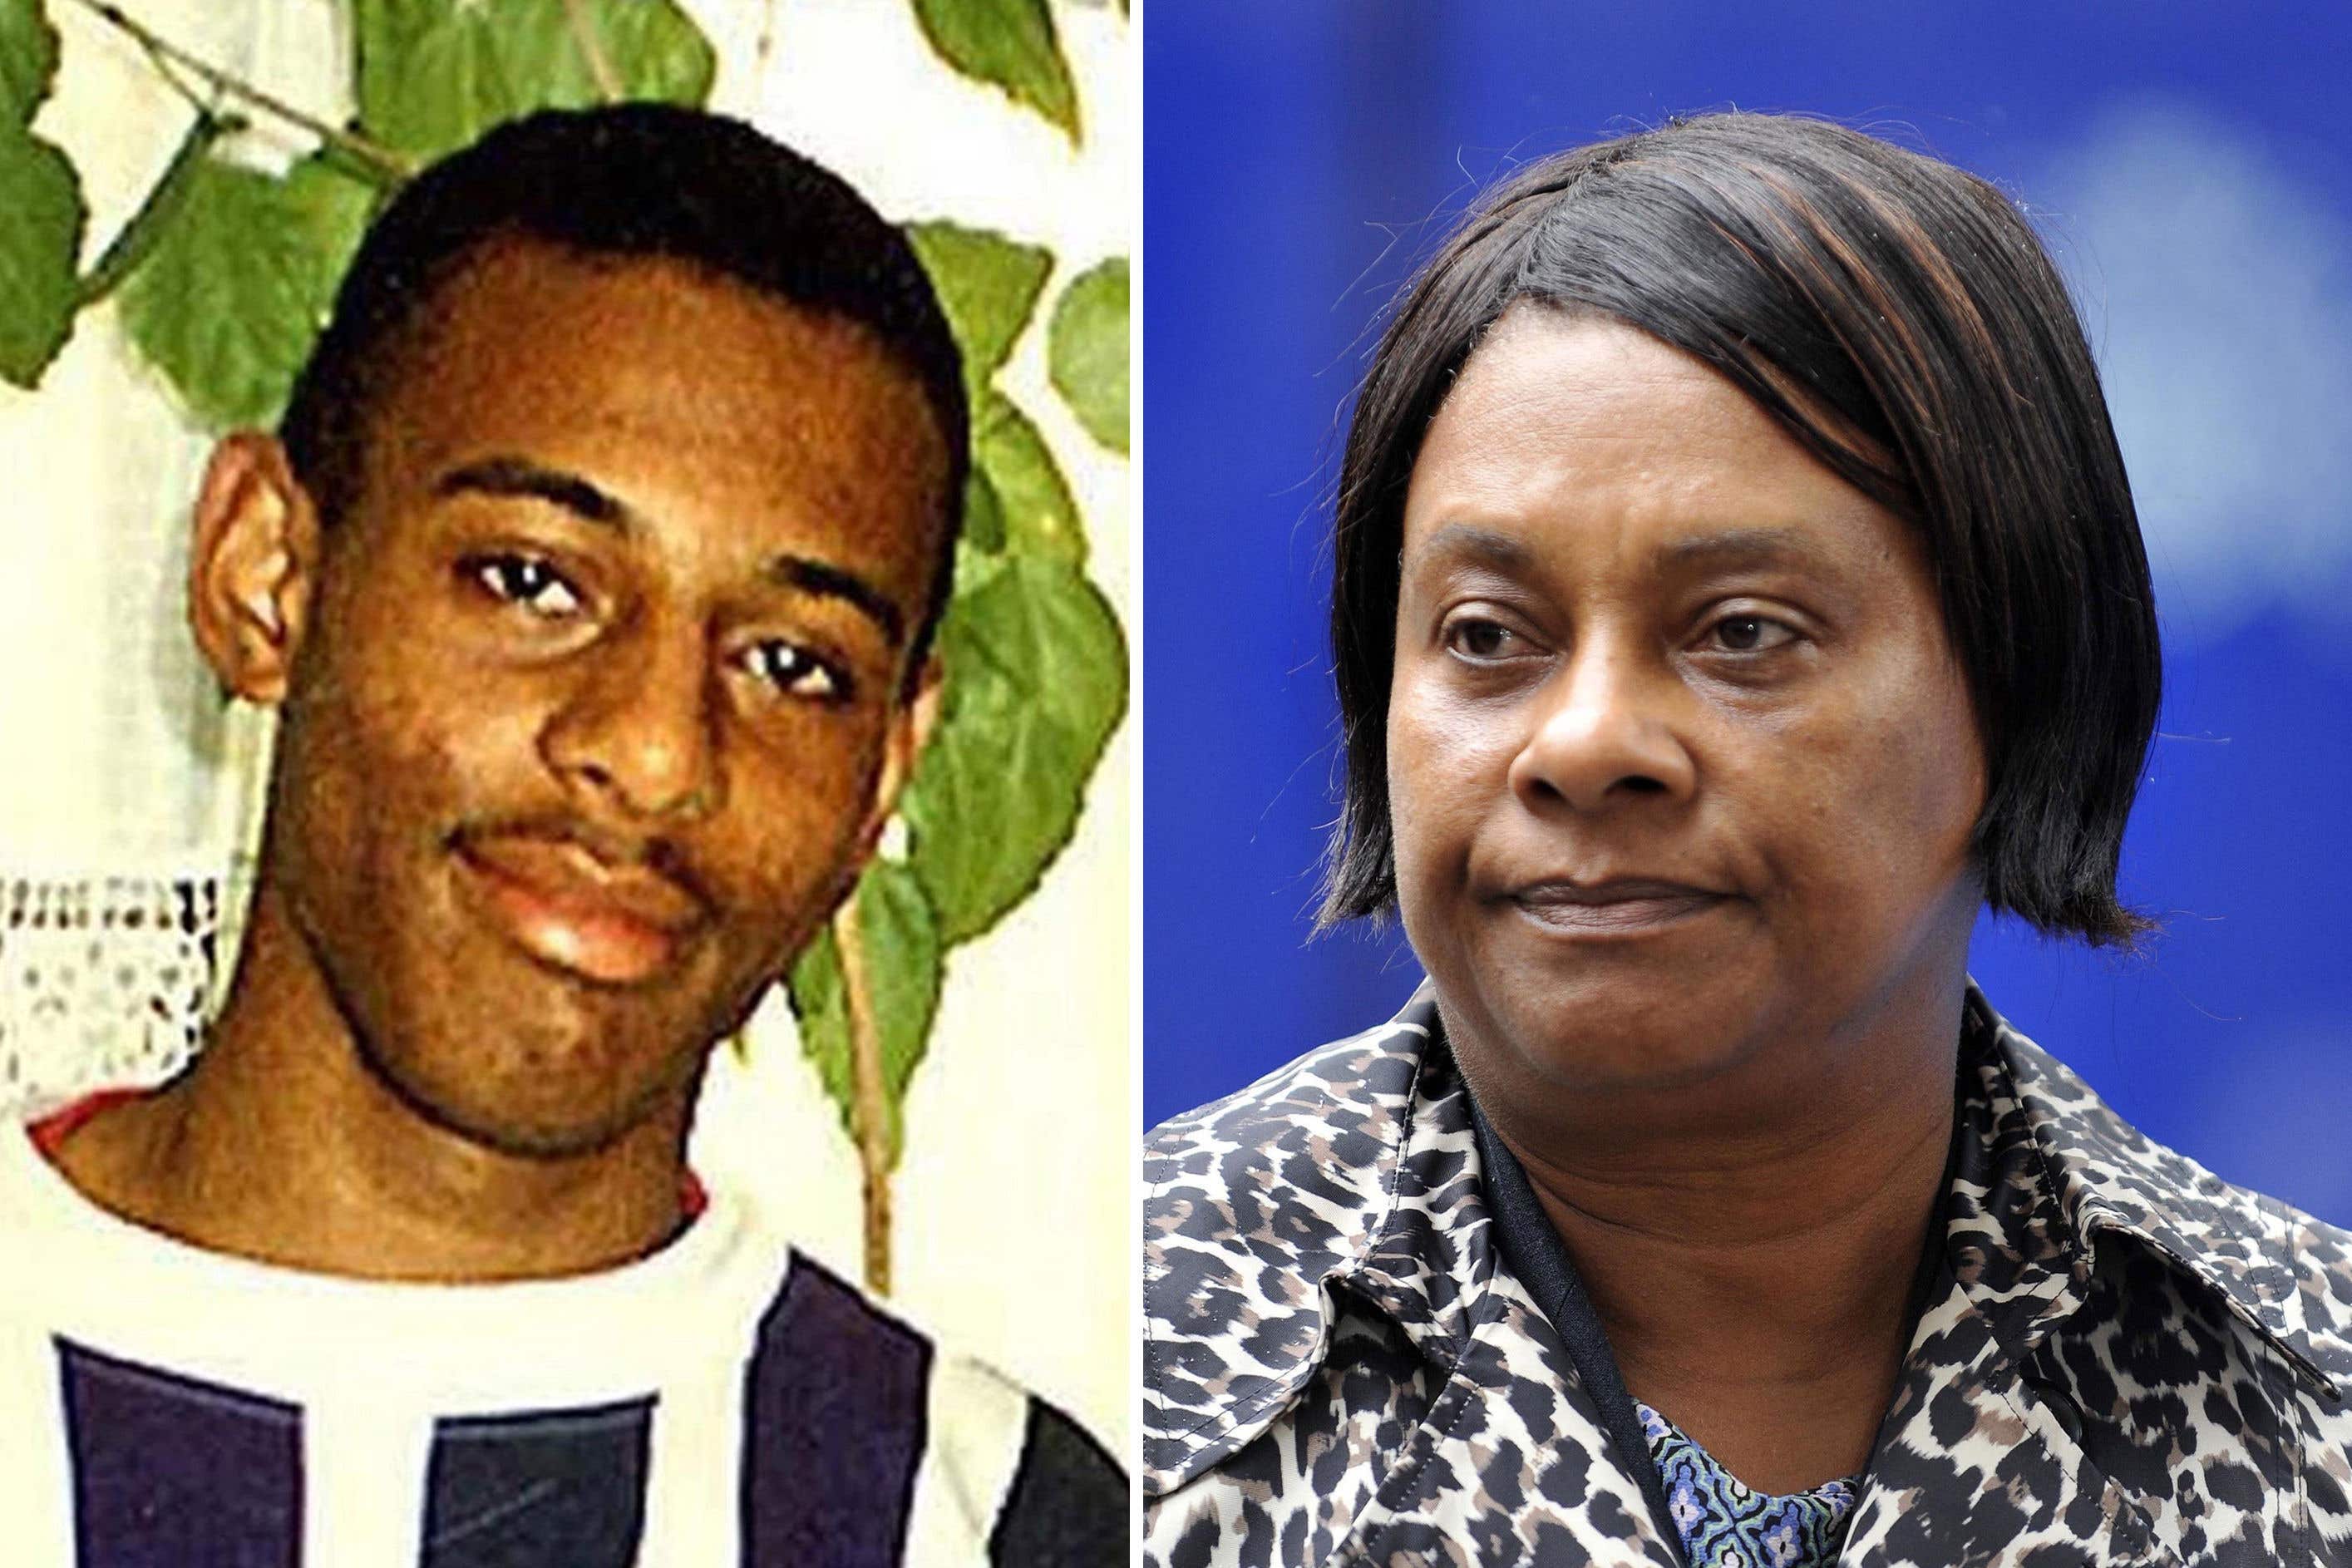 Doreen Lawrence will never get justice for her son. It is shameful that it has taken the BBC to investigate simply because the Met has failed again and again